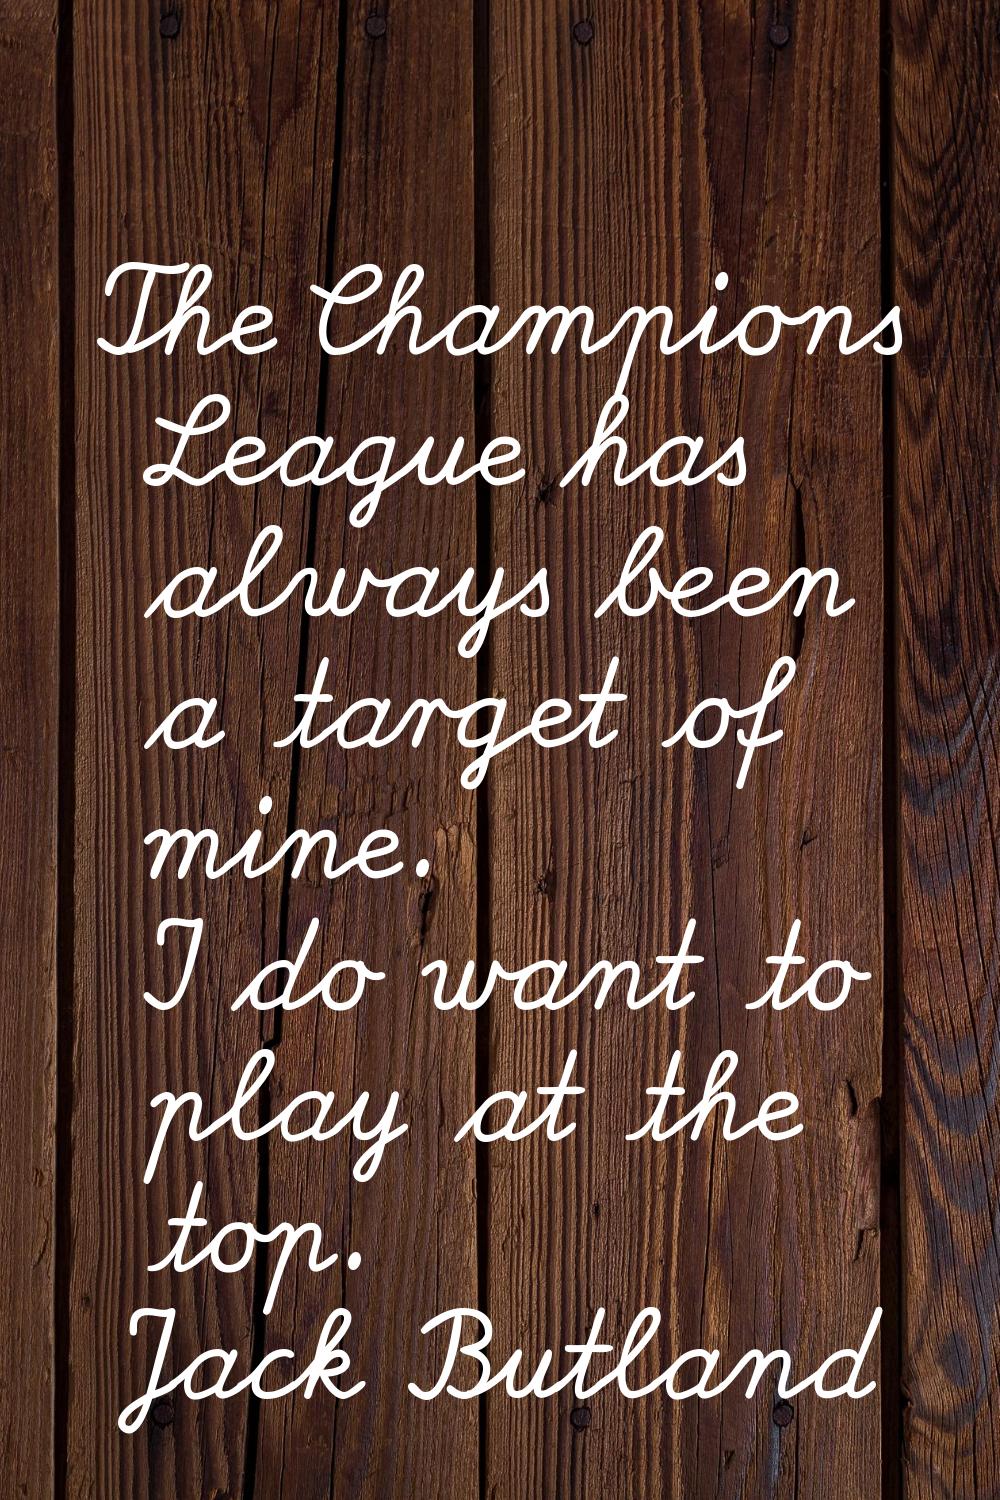 The Champions League has always been a target of mine. I do want to play at the top.